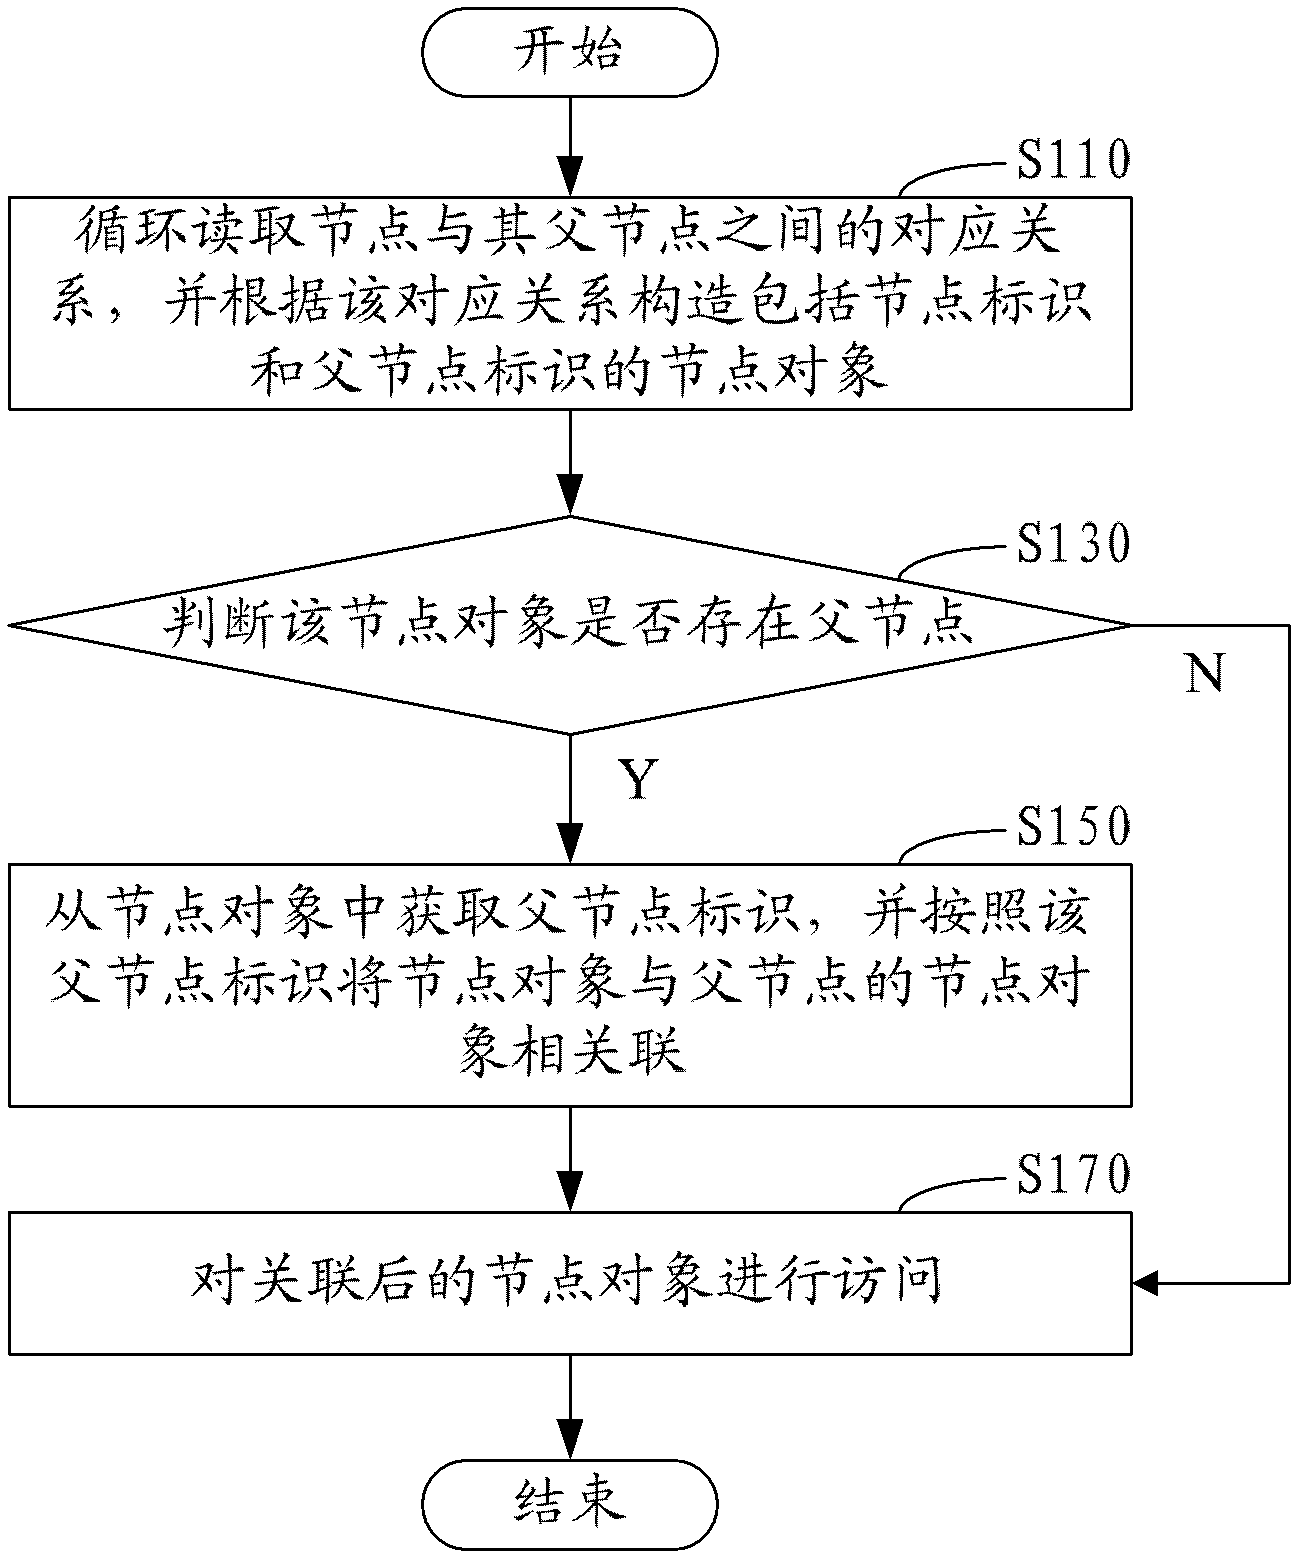 Method and system for accessing tree-structured data